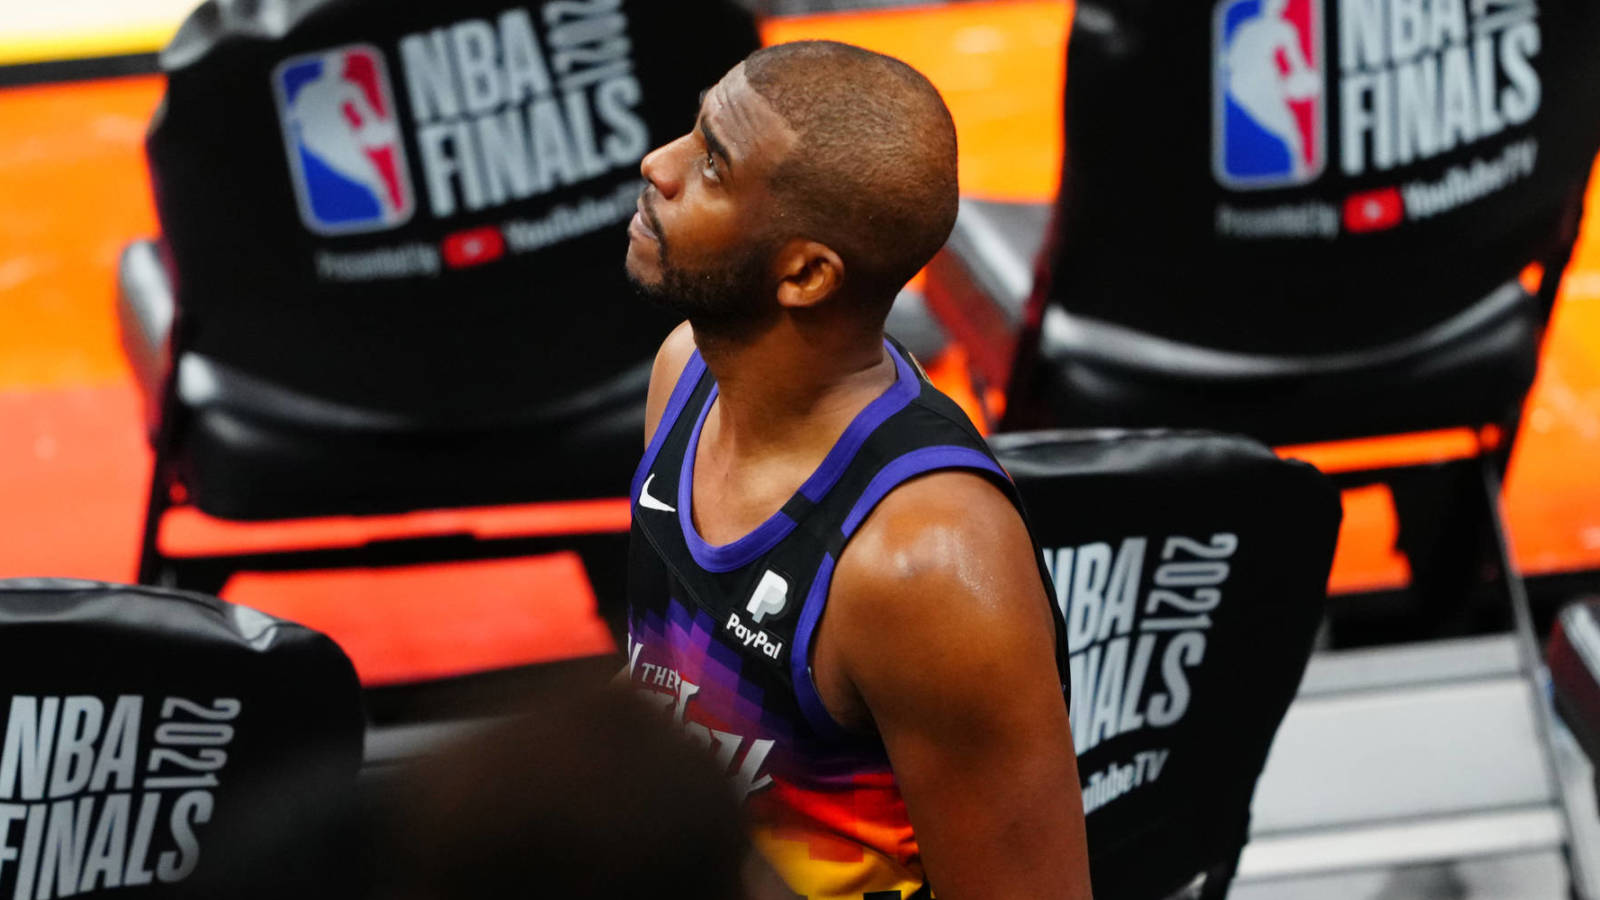 Chris Paul couldn't stay calm moments before clinching NBA Finals berth